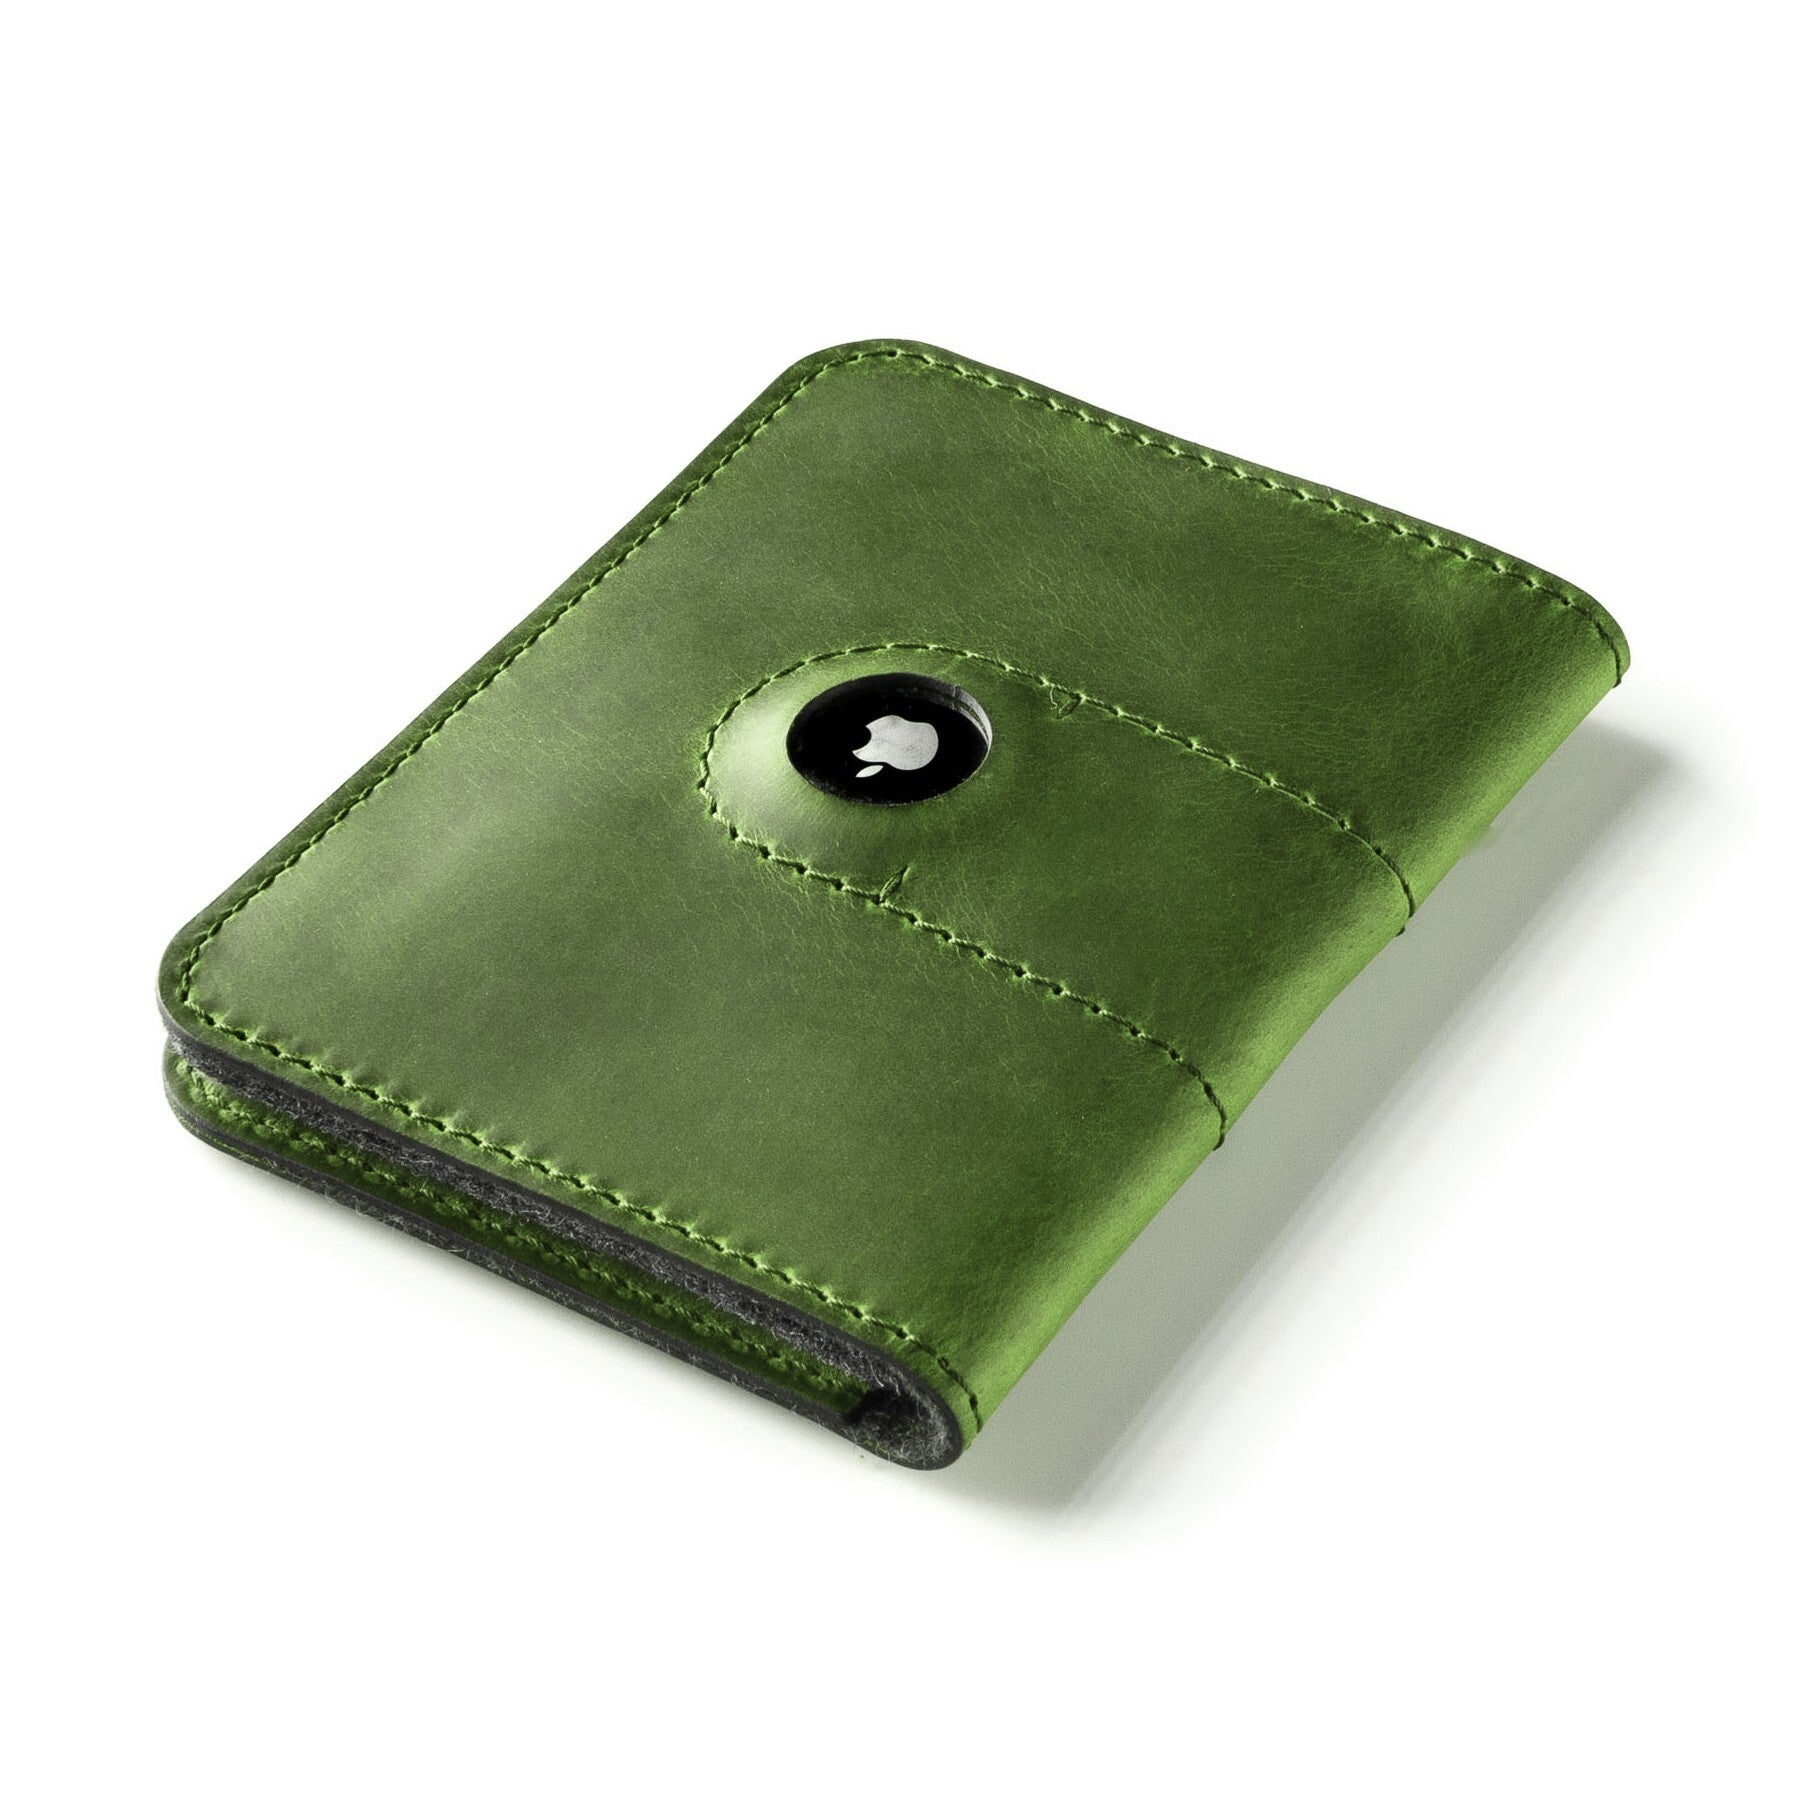 Veg-Tanned Leather AirTag Passport Wallet / Case